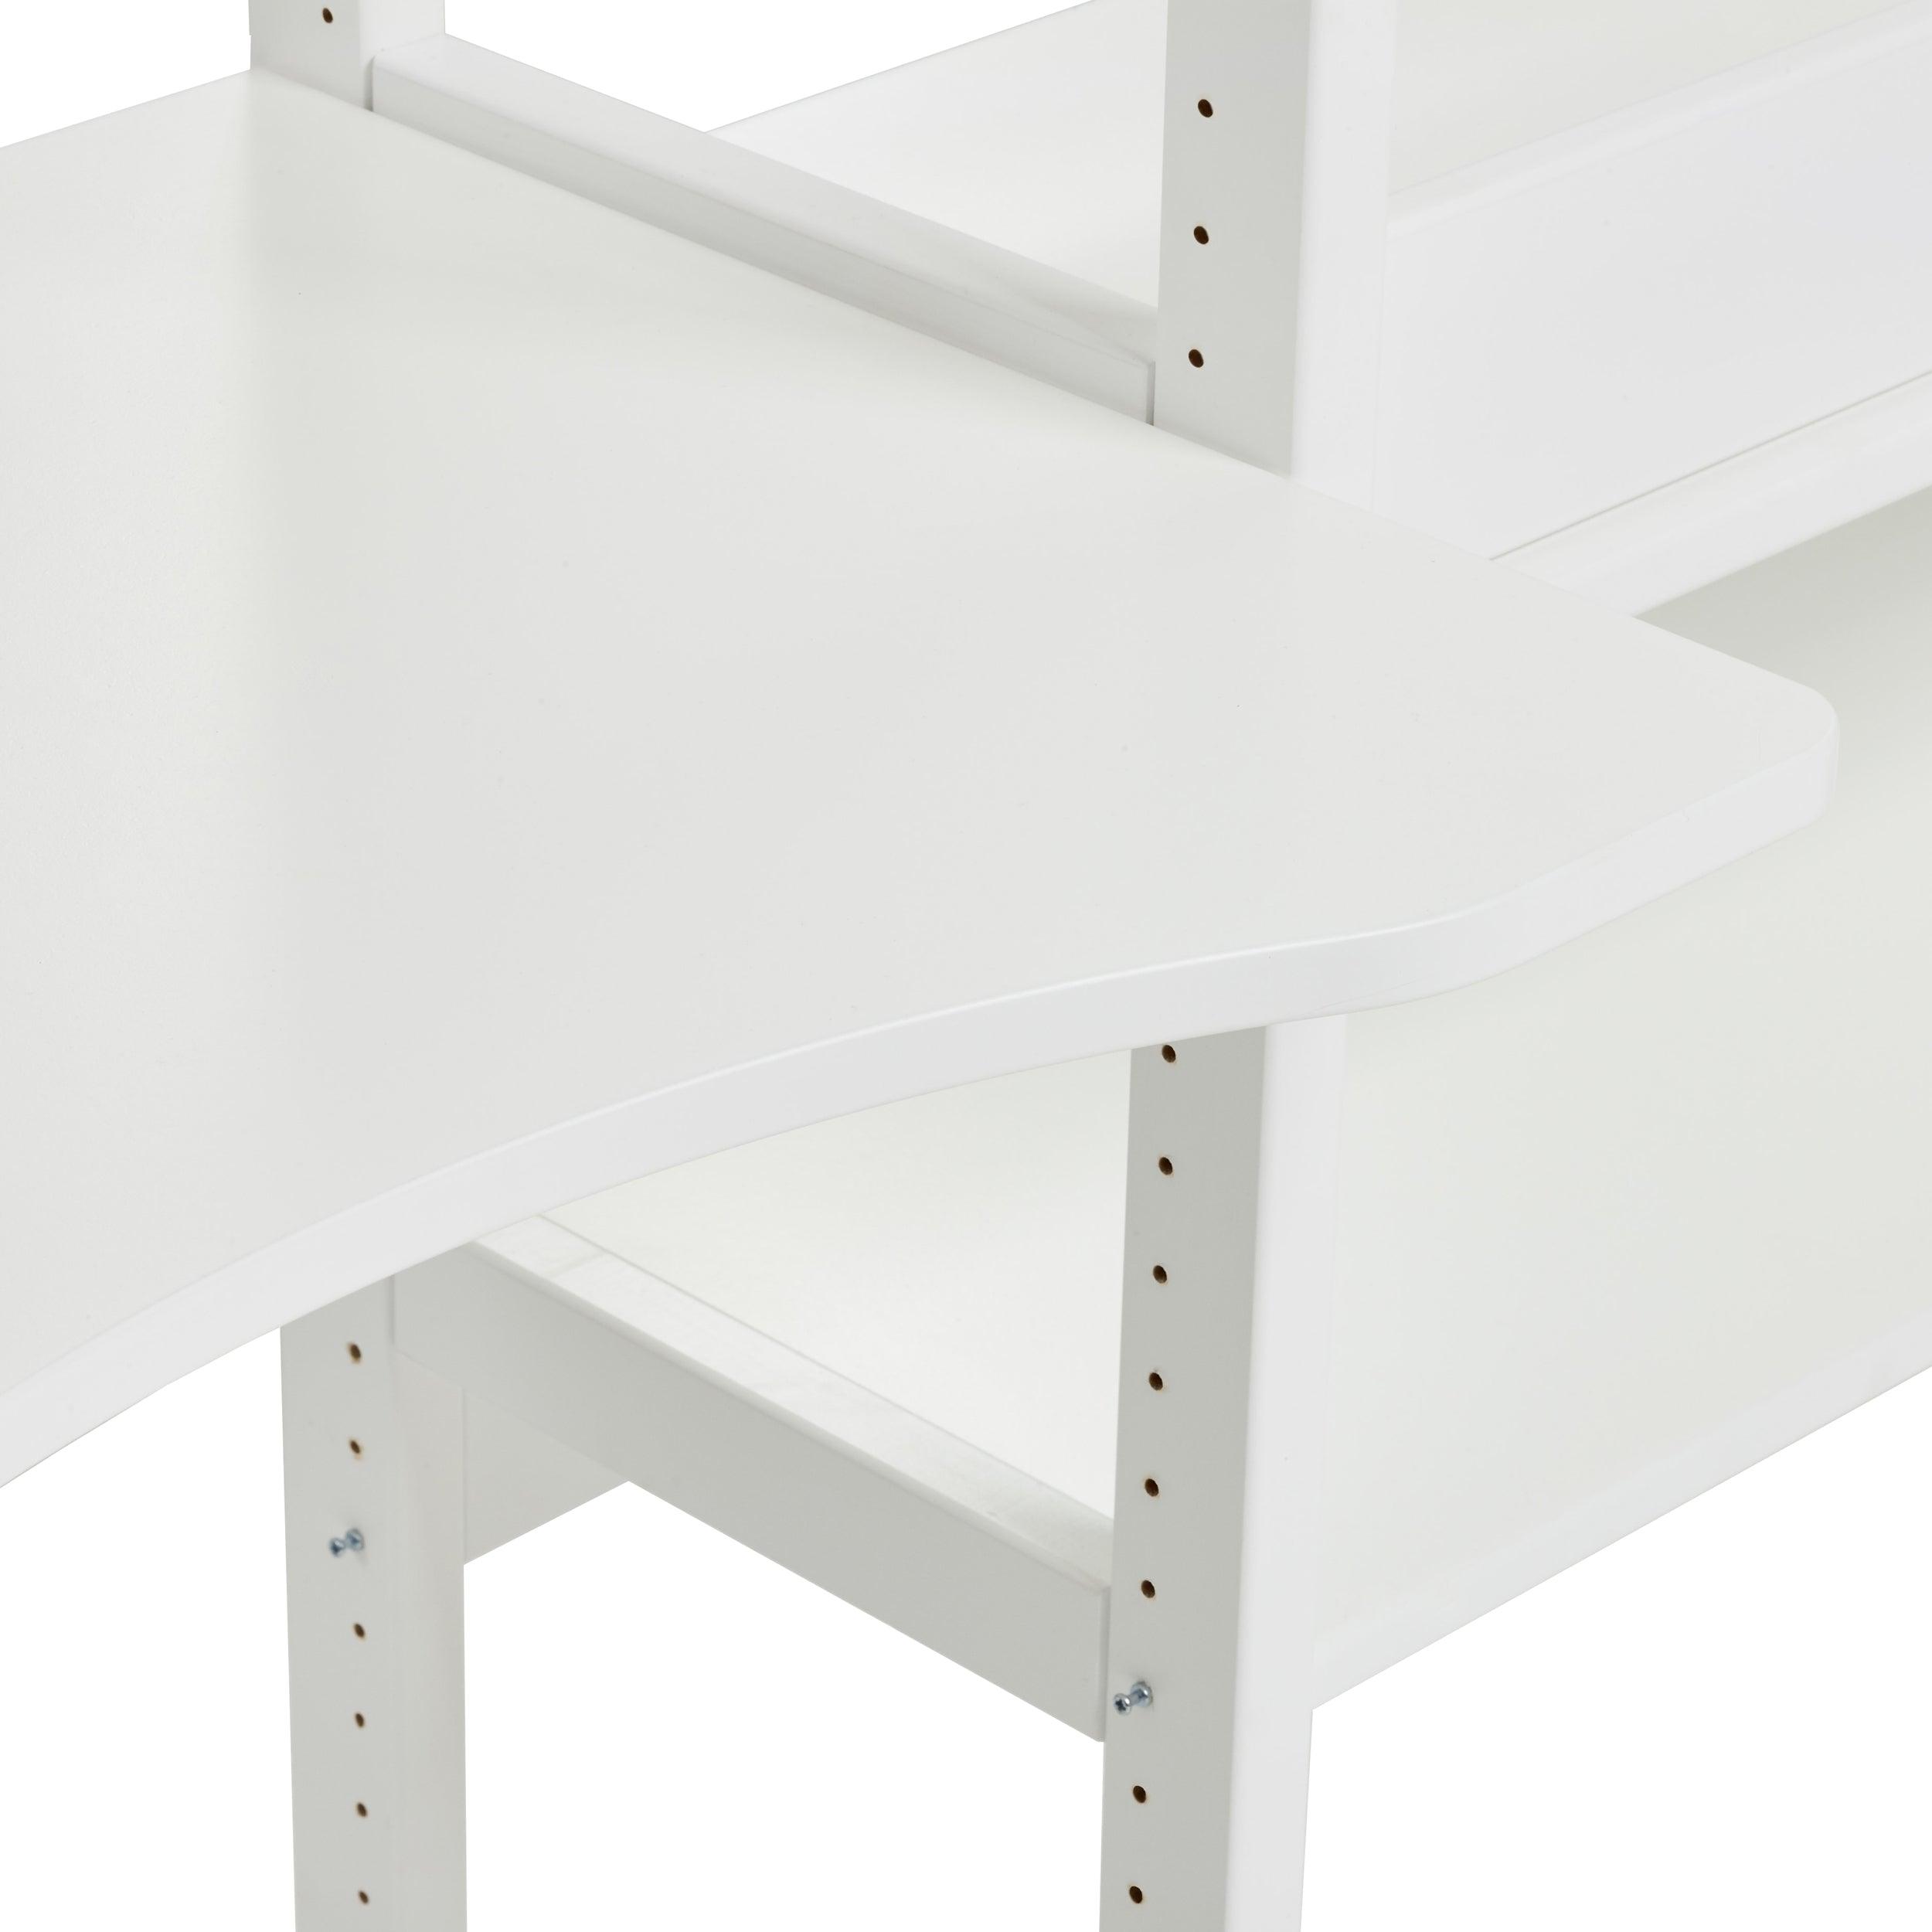 Hoppekids STOREY shelf with 3 sections, 12 shelves, and a writing desk in 80 cm, White